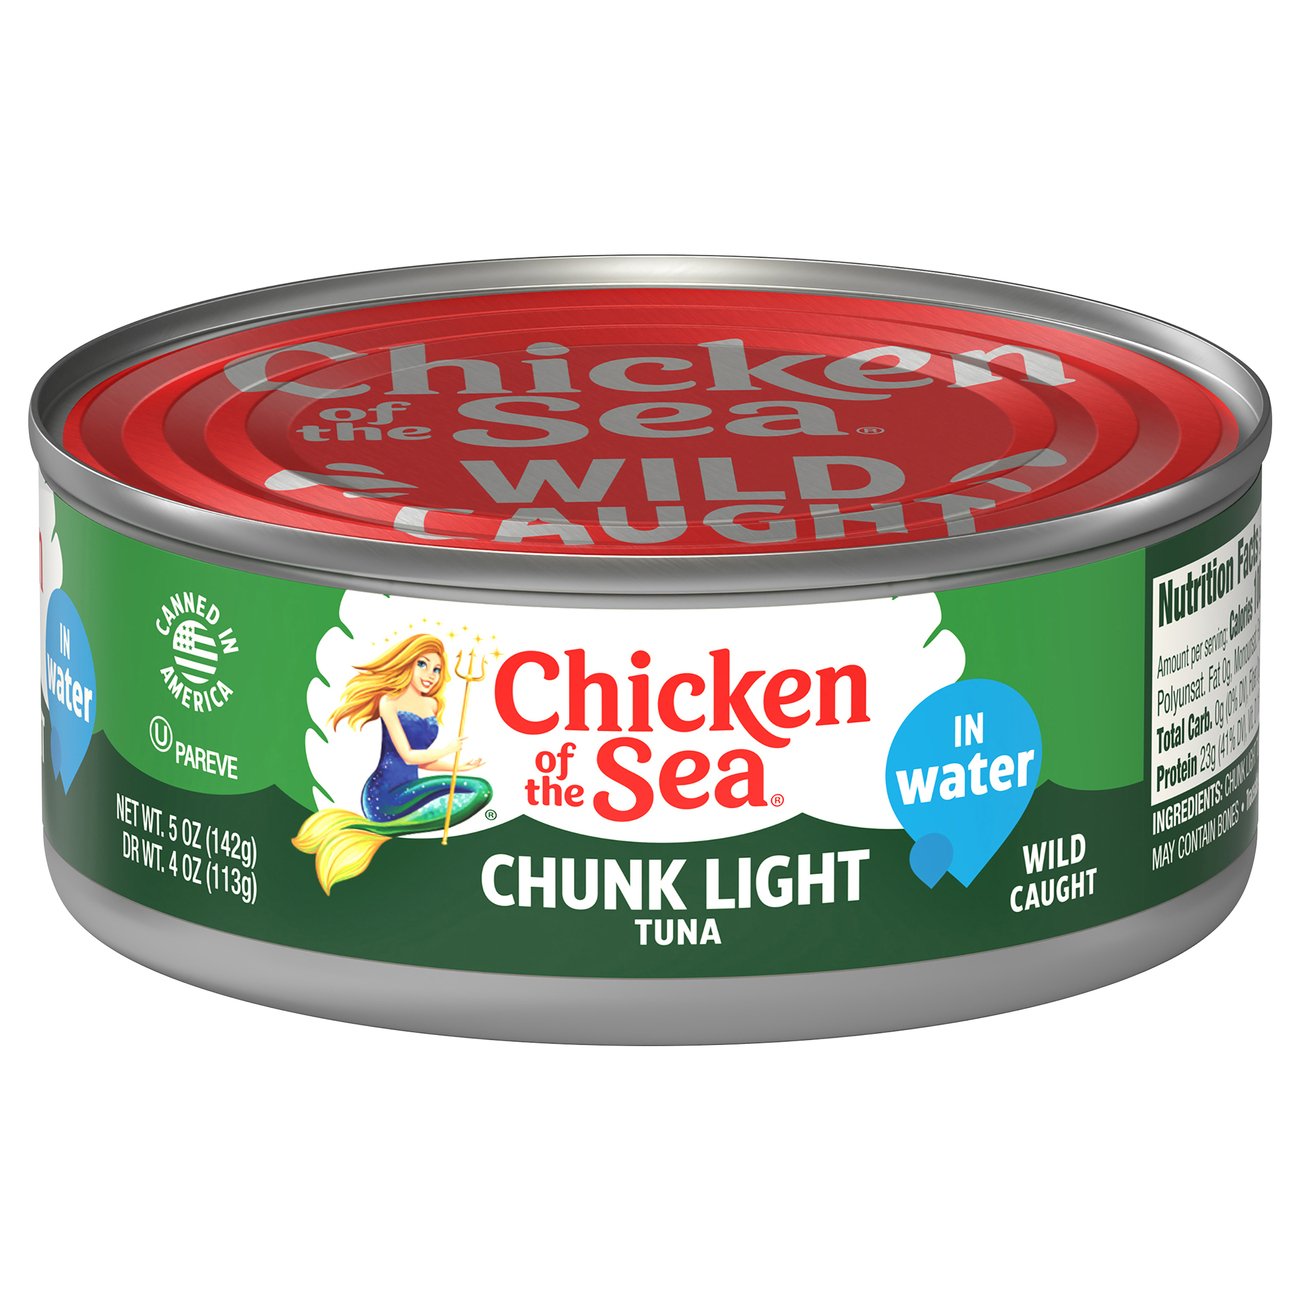 Chicken of the Sea Chunk Light Tuna in Water - Shop Seafood at H-E-B